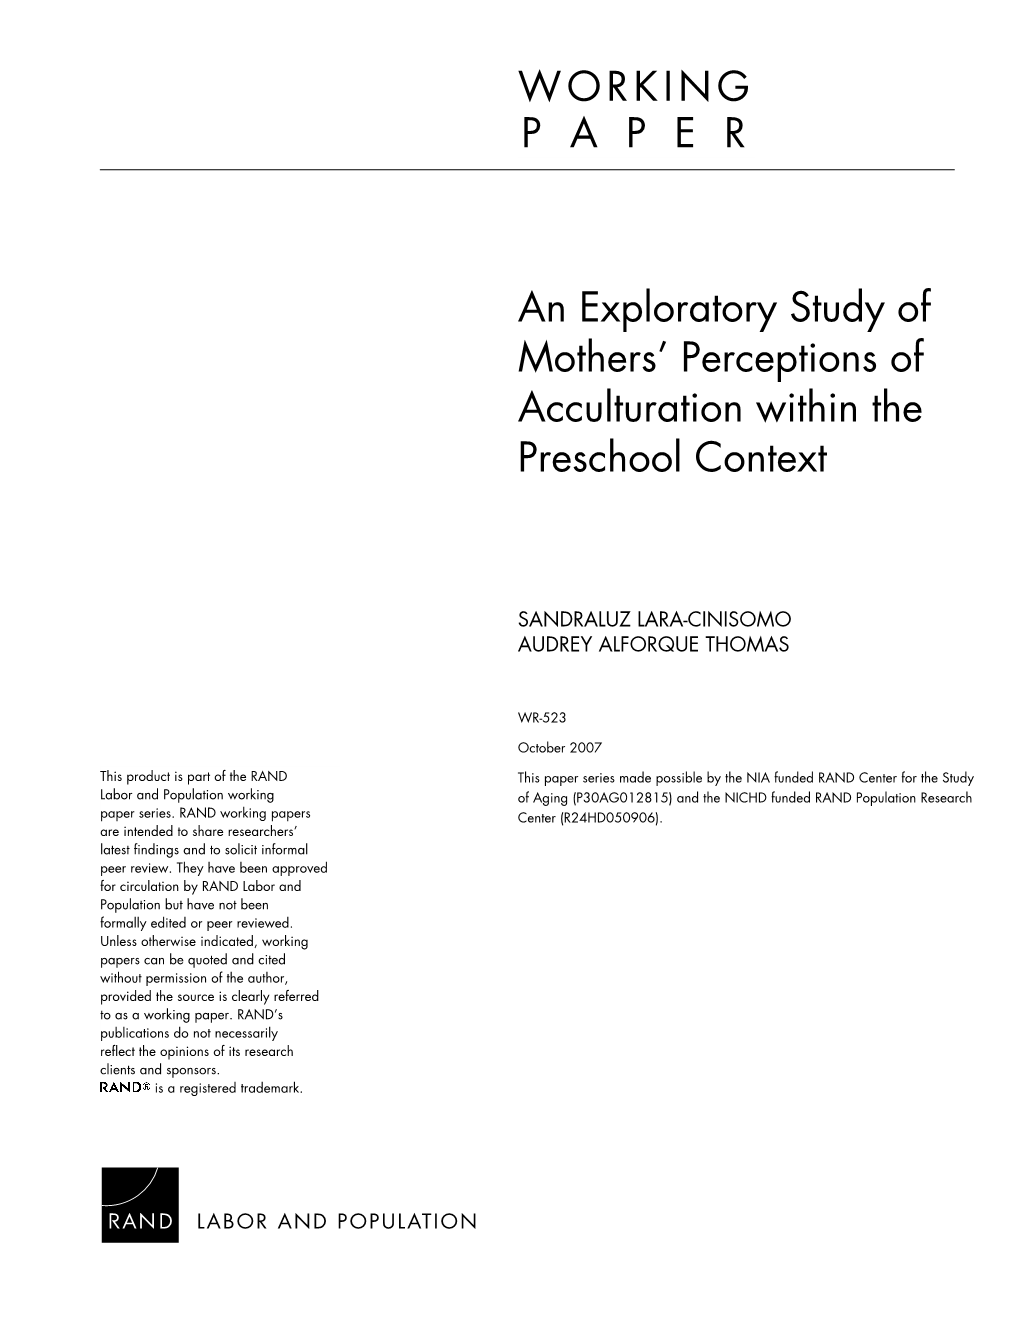 An Exploratory Study of Mothers' Perceptions of Acculturation Within